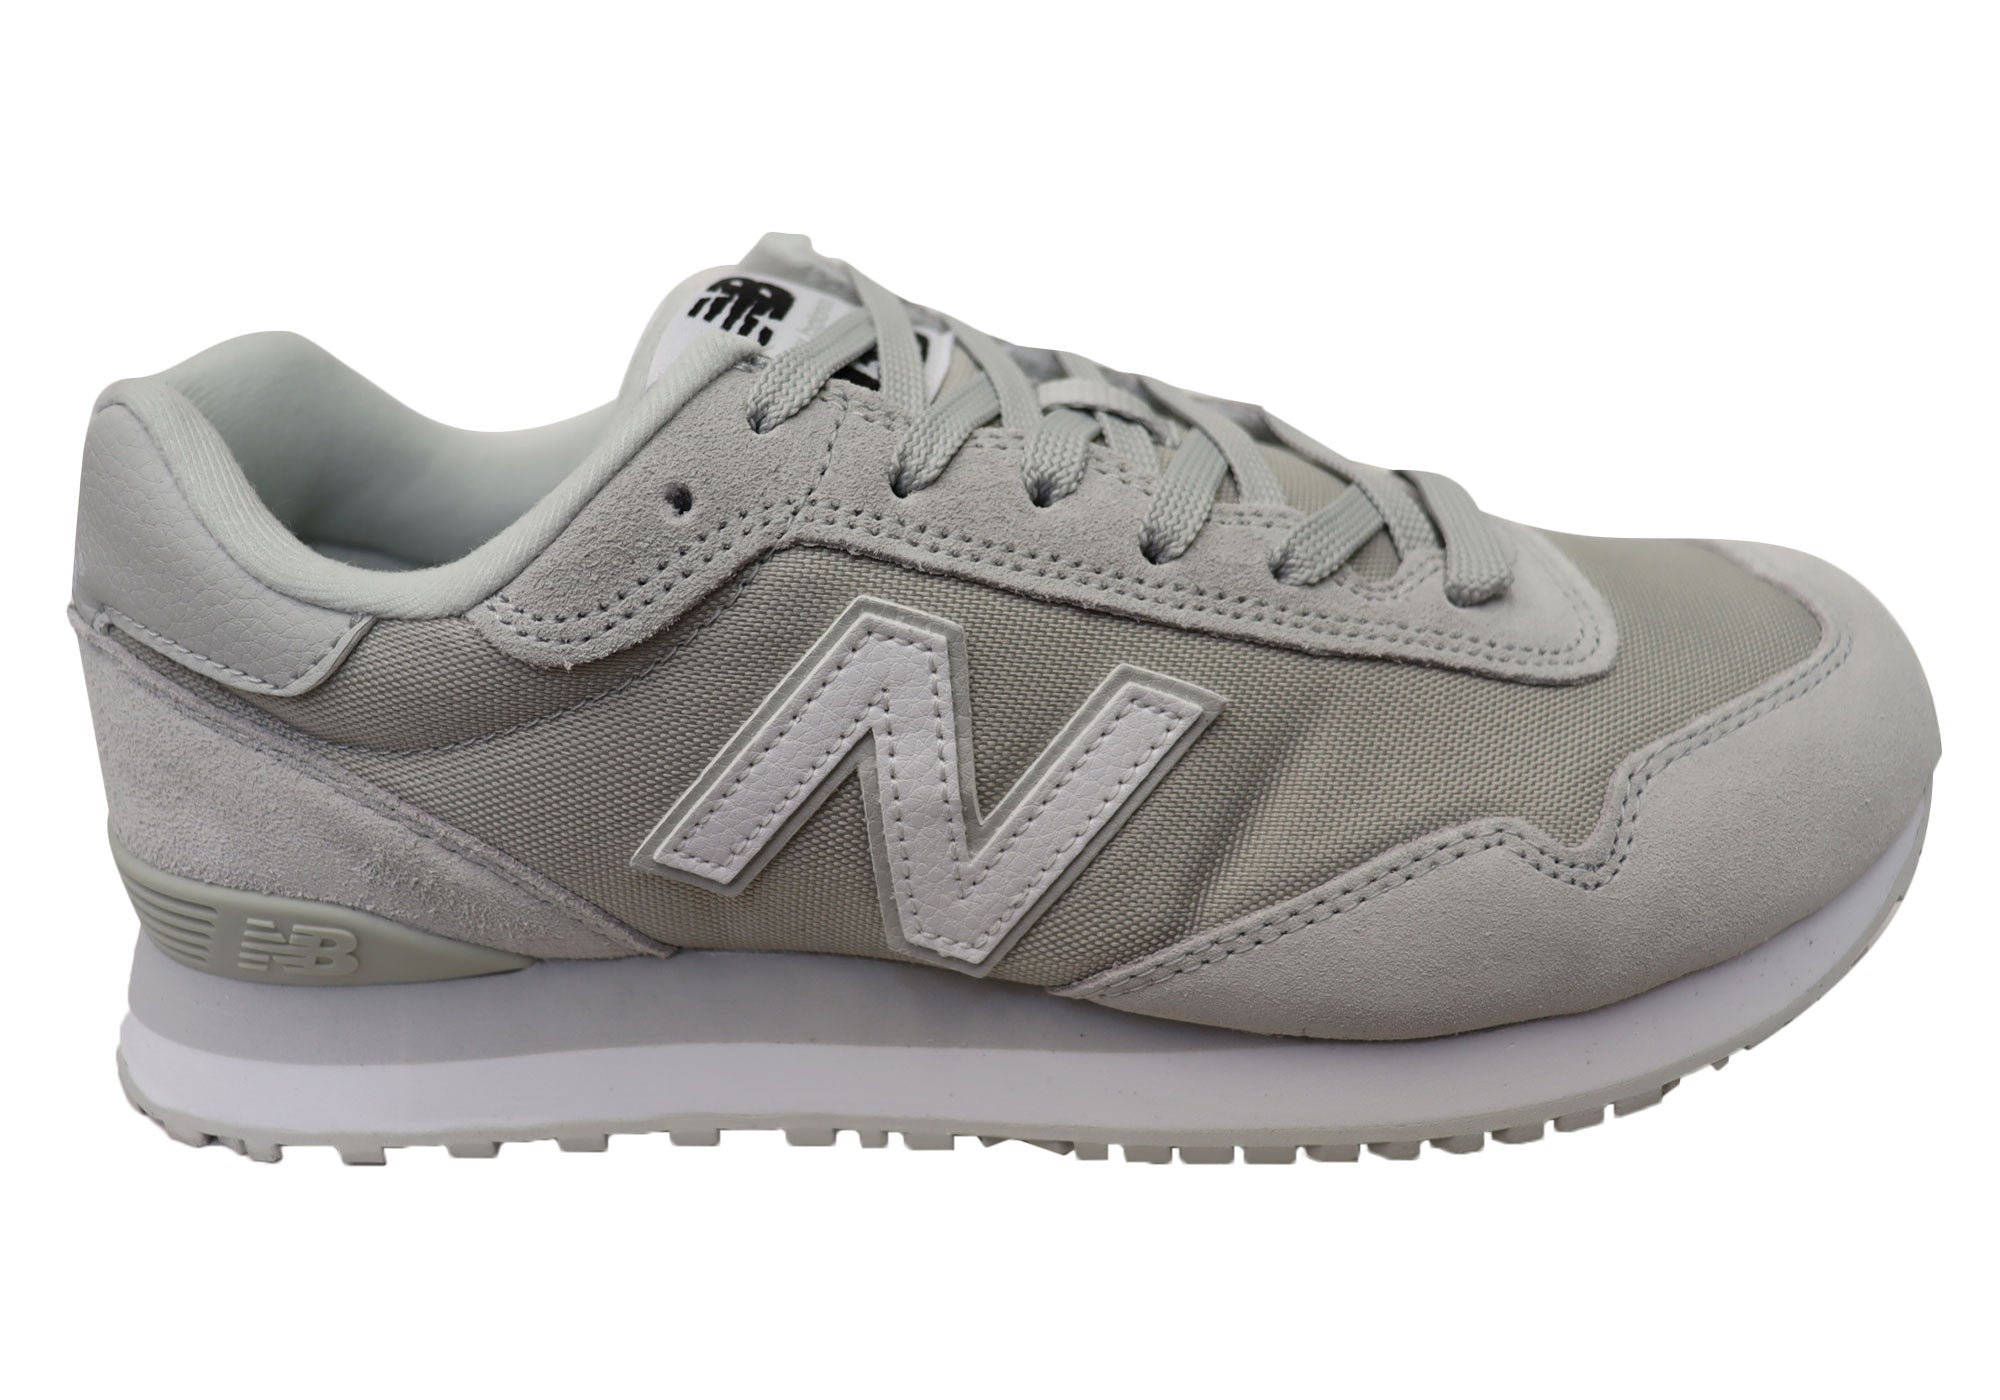 New Balance 574 Casual Style Shoes, Women's 9.5 | eBay